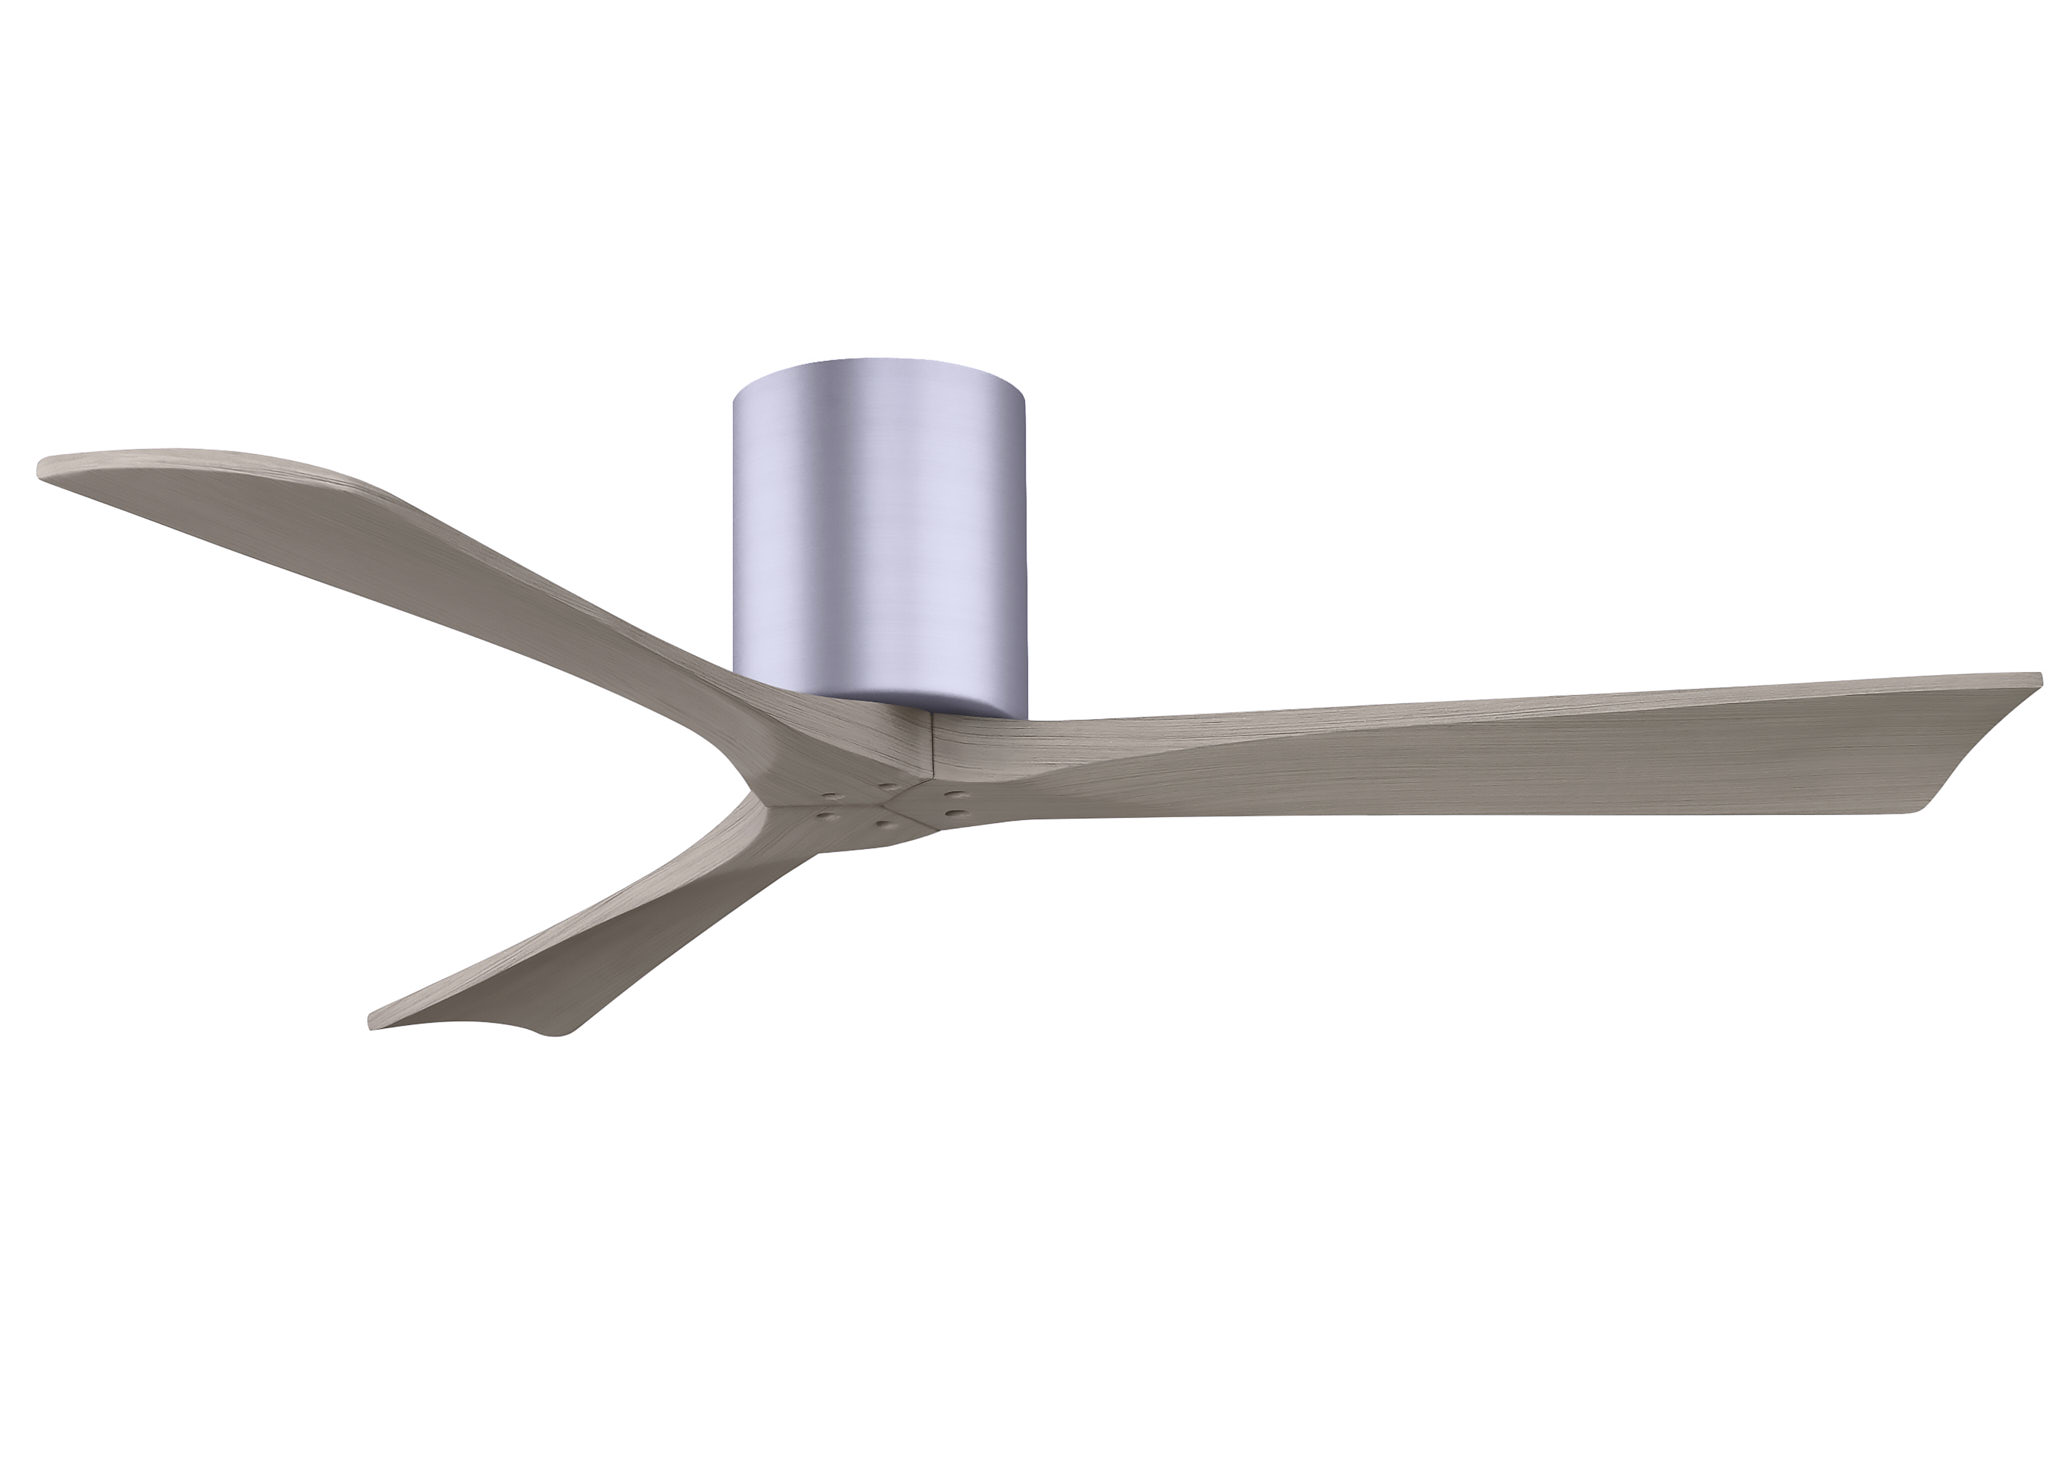 Irene-3H 6-speed ceiling fan in brushed nickel finish with 52